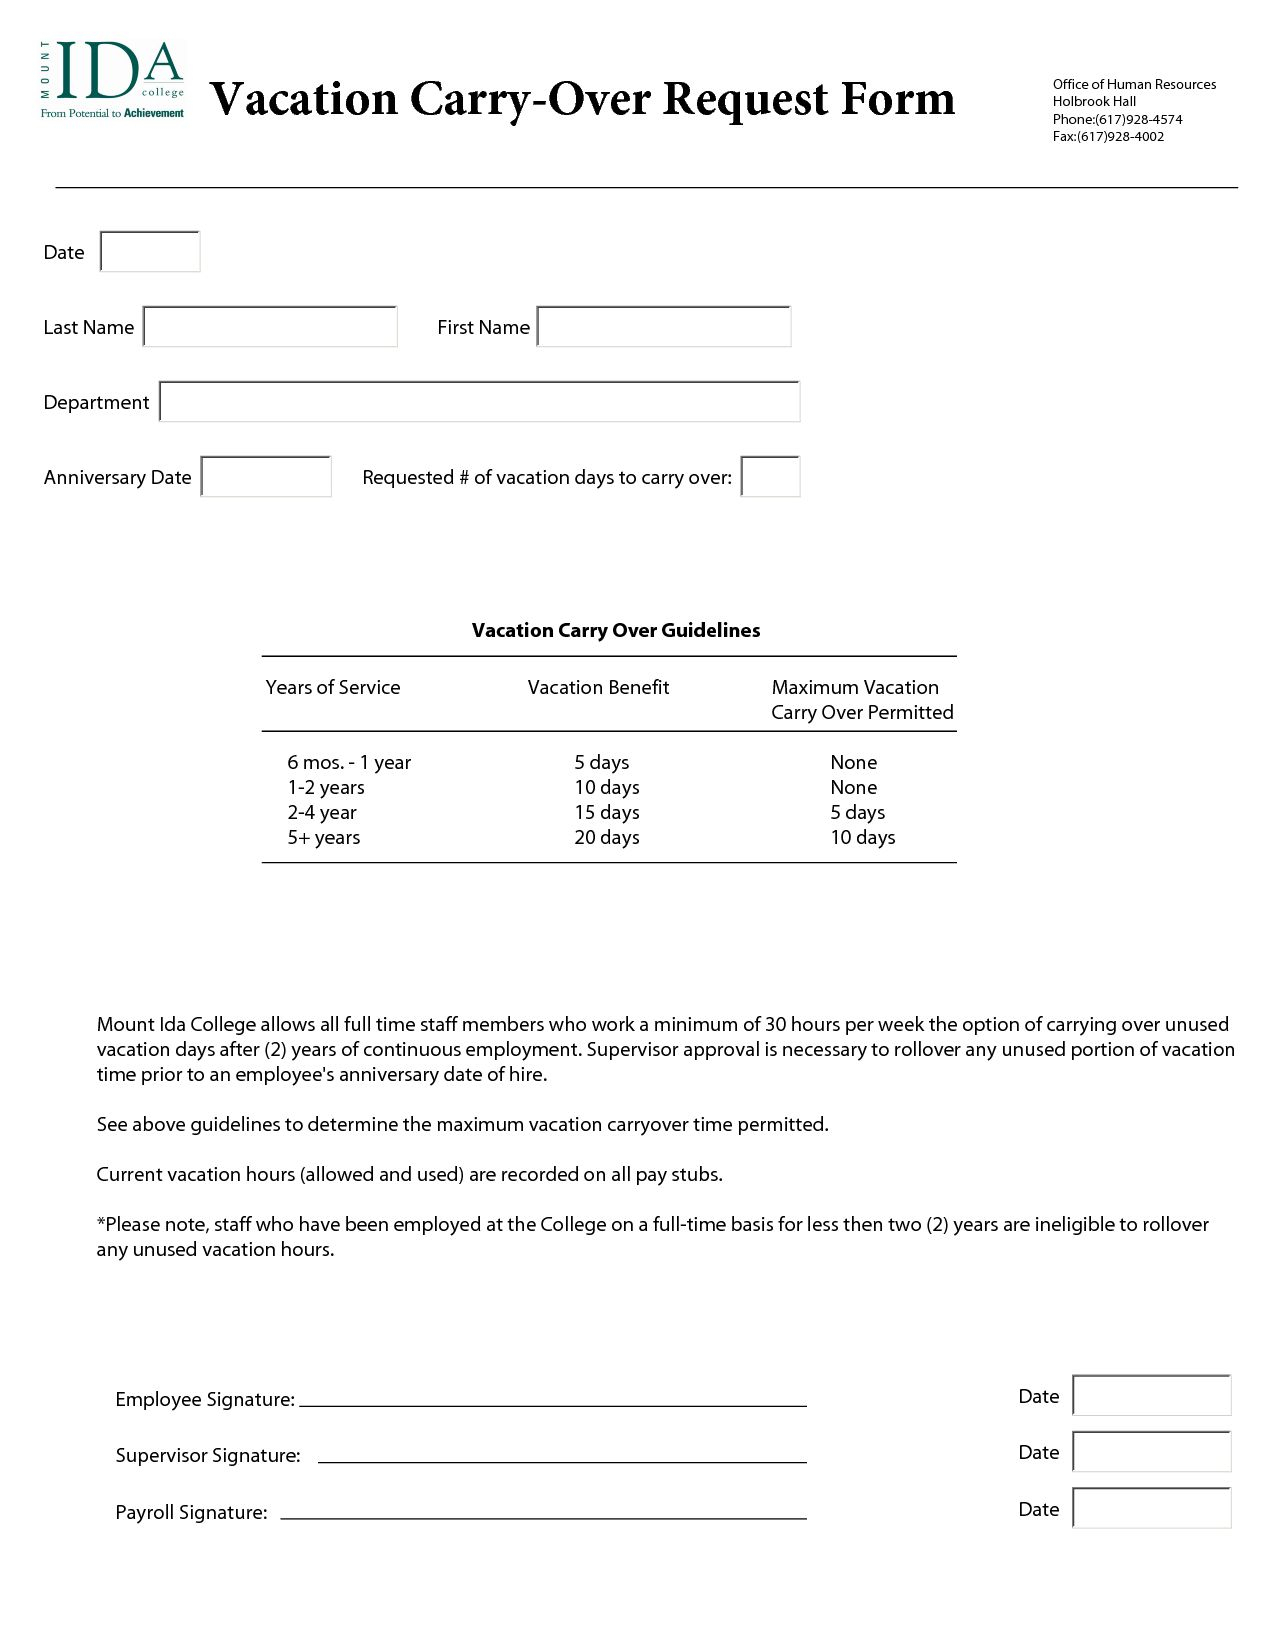 Travel Request Form Template Excel Or Annual Leave Request Within Travel Request Form Template Word